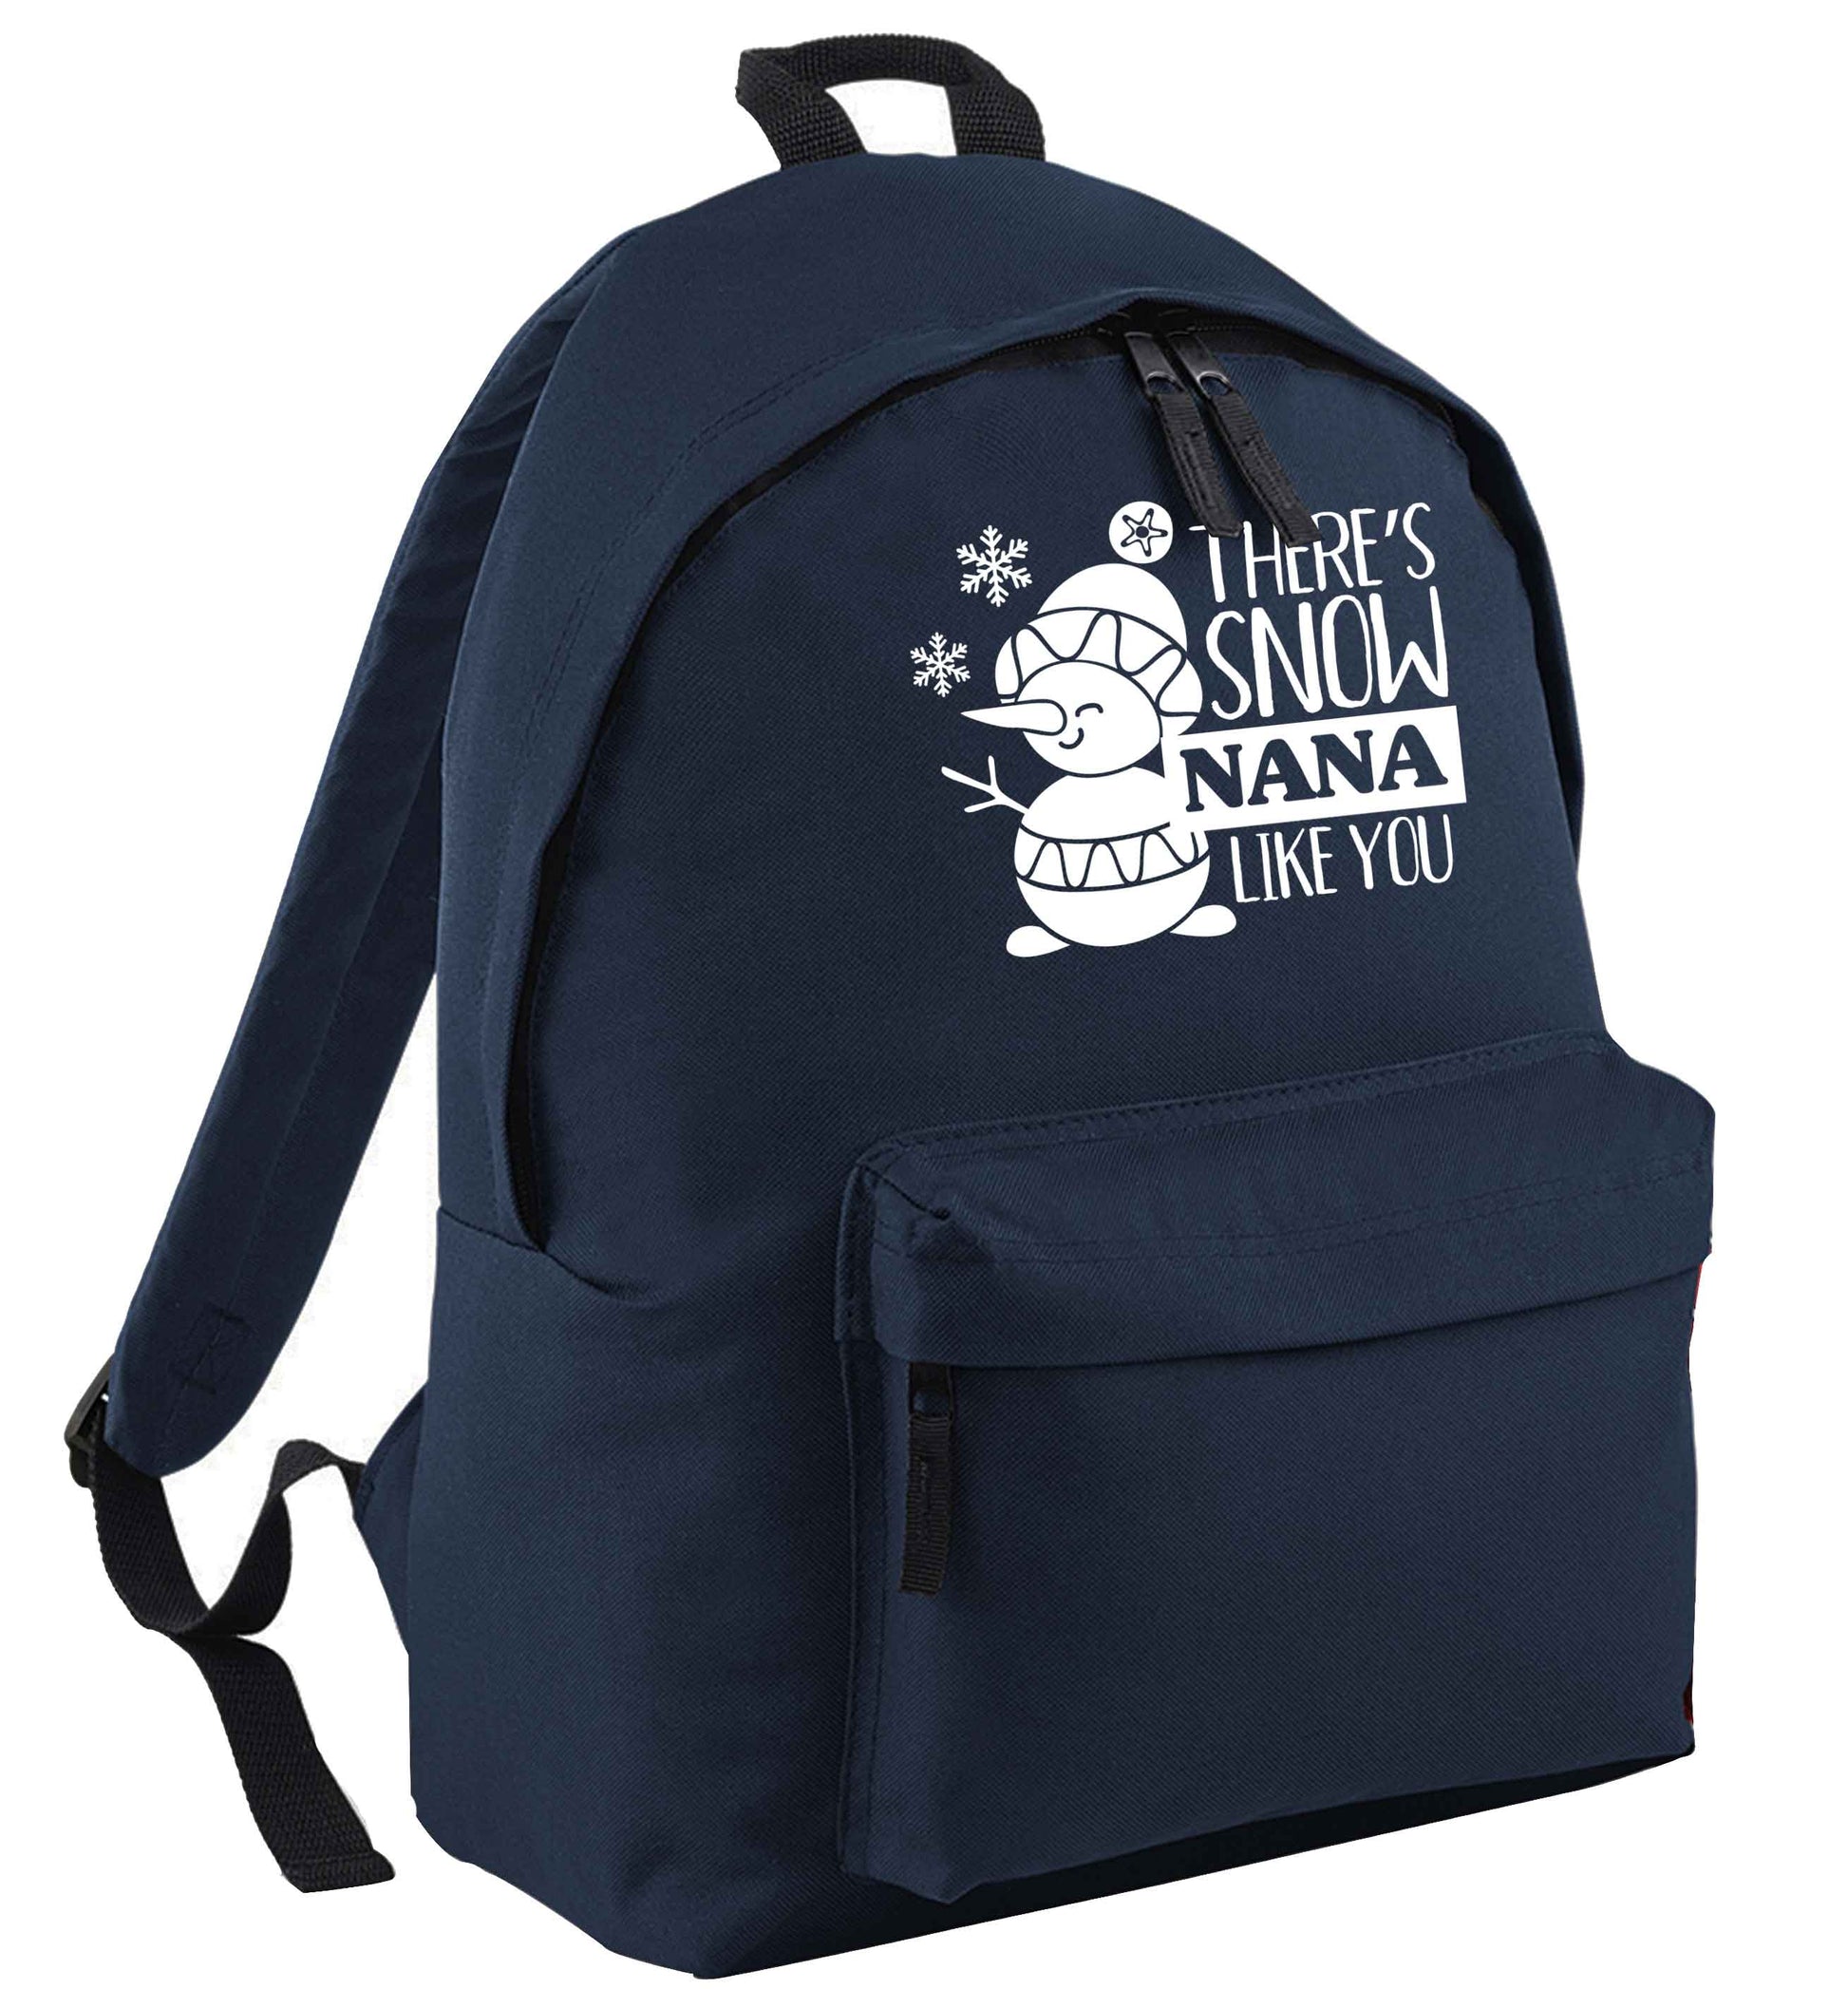 There's snow nana like you navy adults backpack